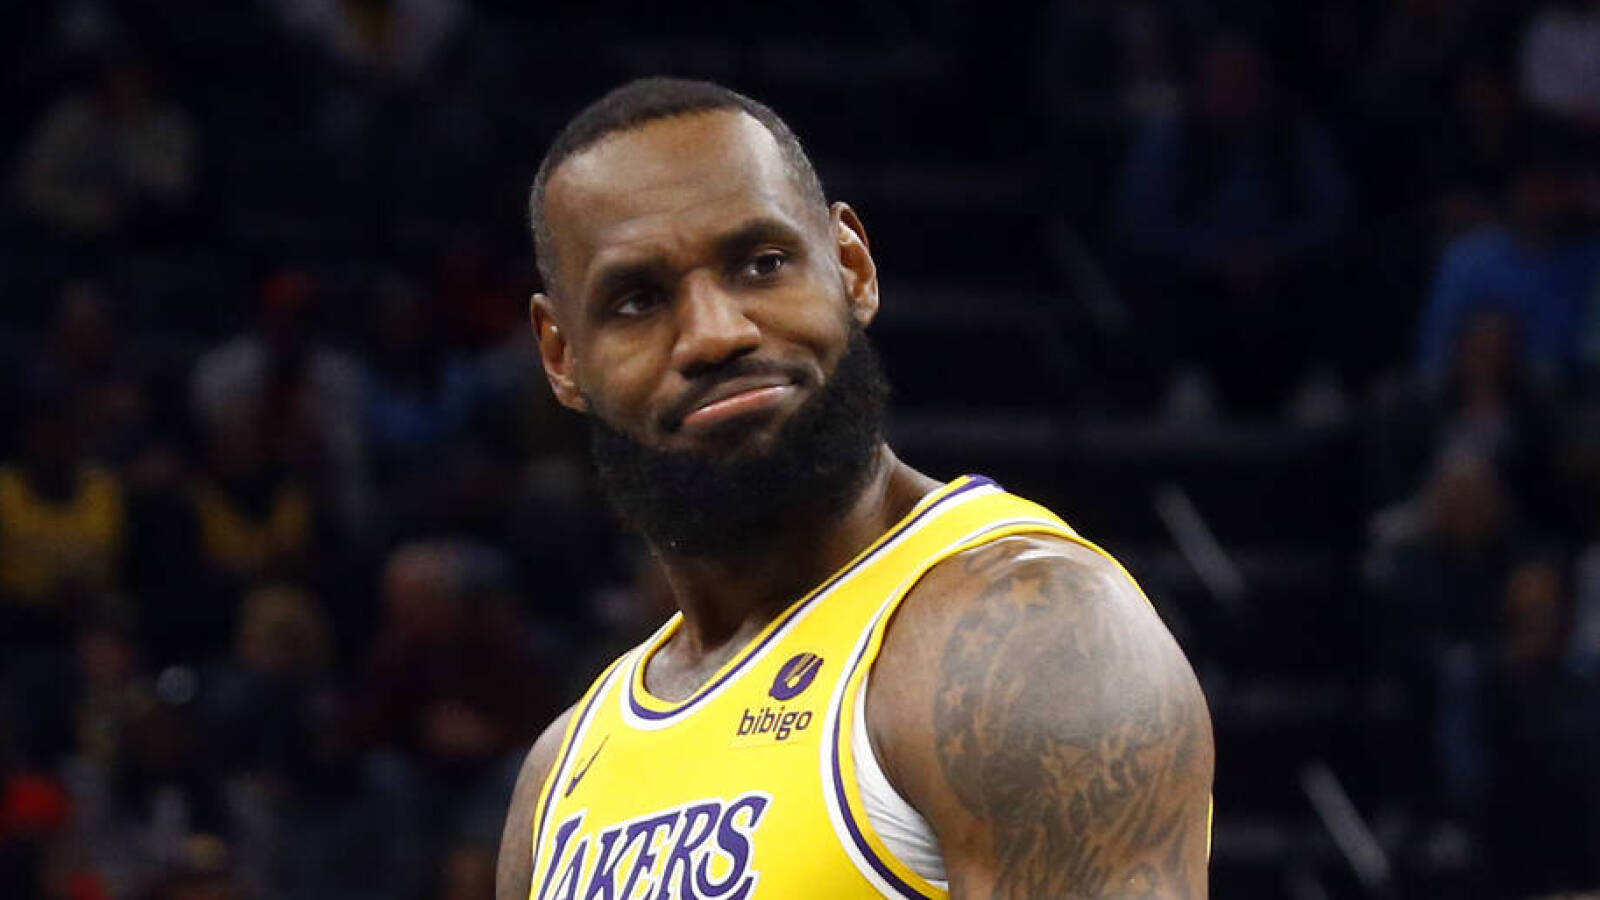 Lakers’ LeBron James To Be ‘Very Strategic’ With Injured Foot Moving Forward